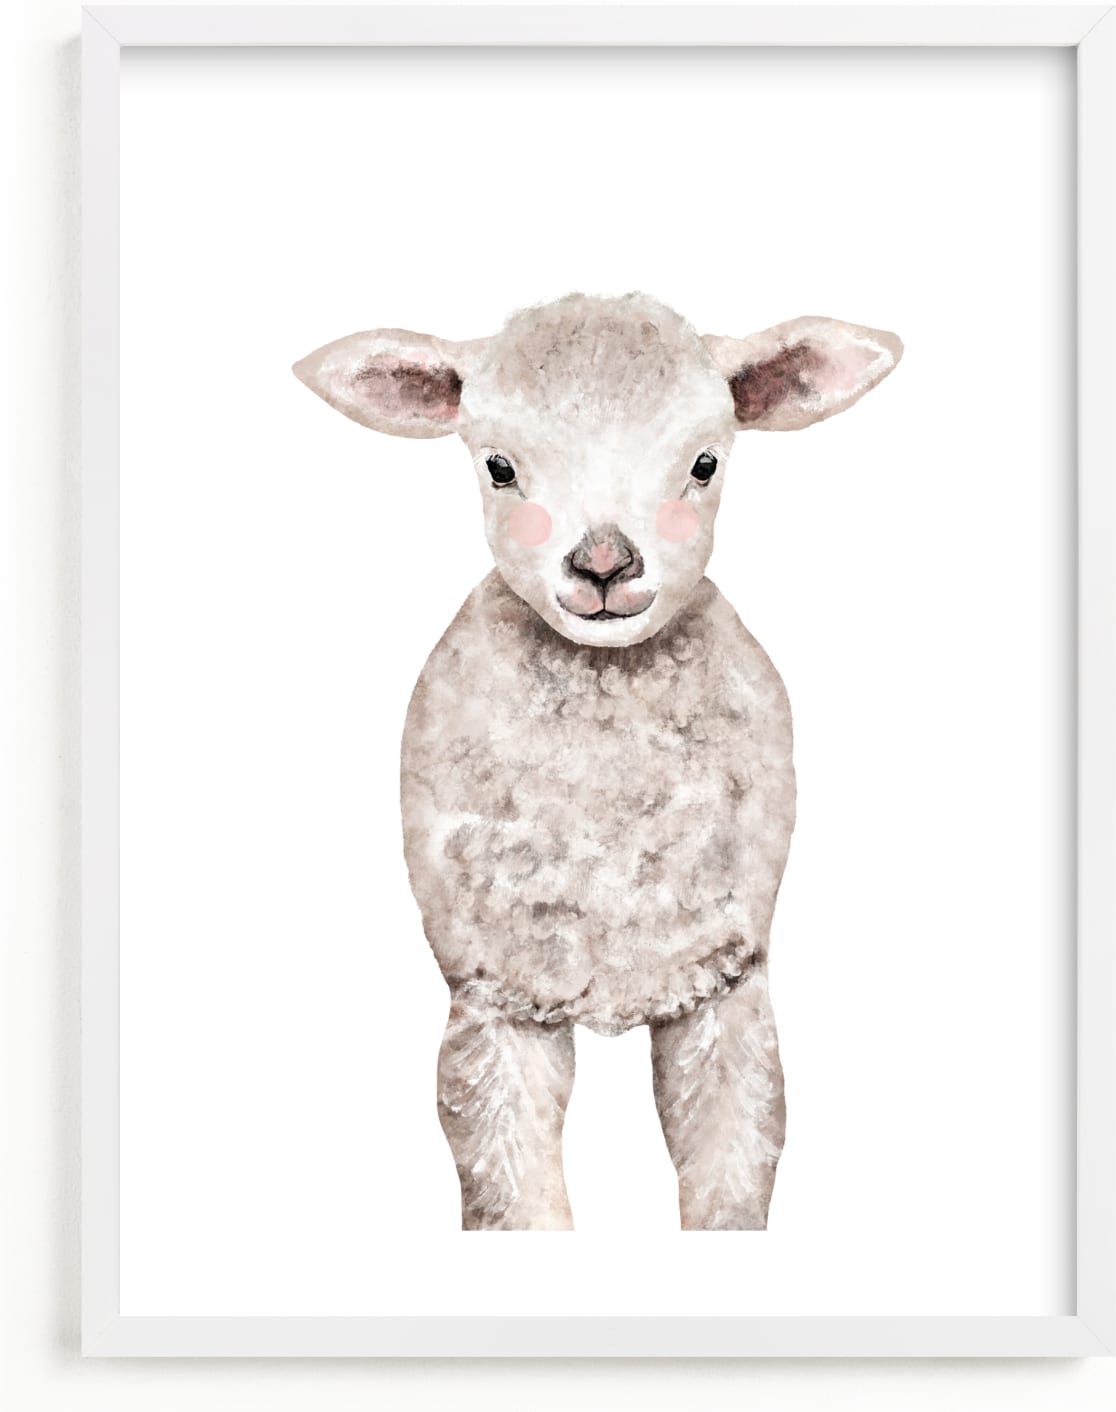 This is a white art by Cass Loh called Baby Animal Sheep.